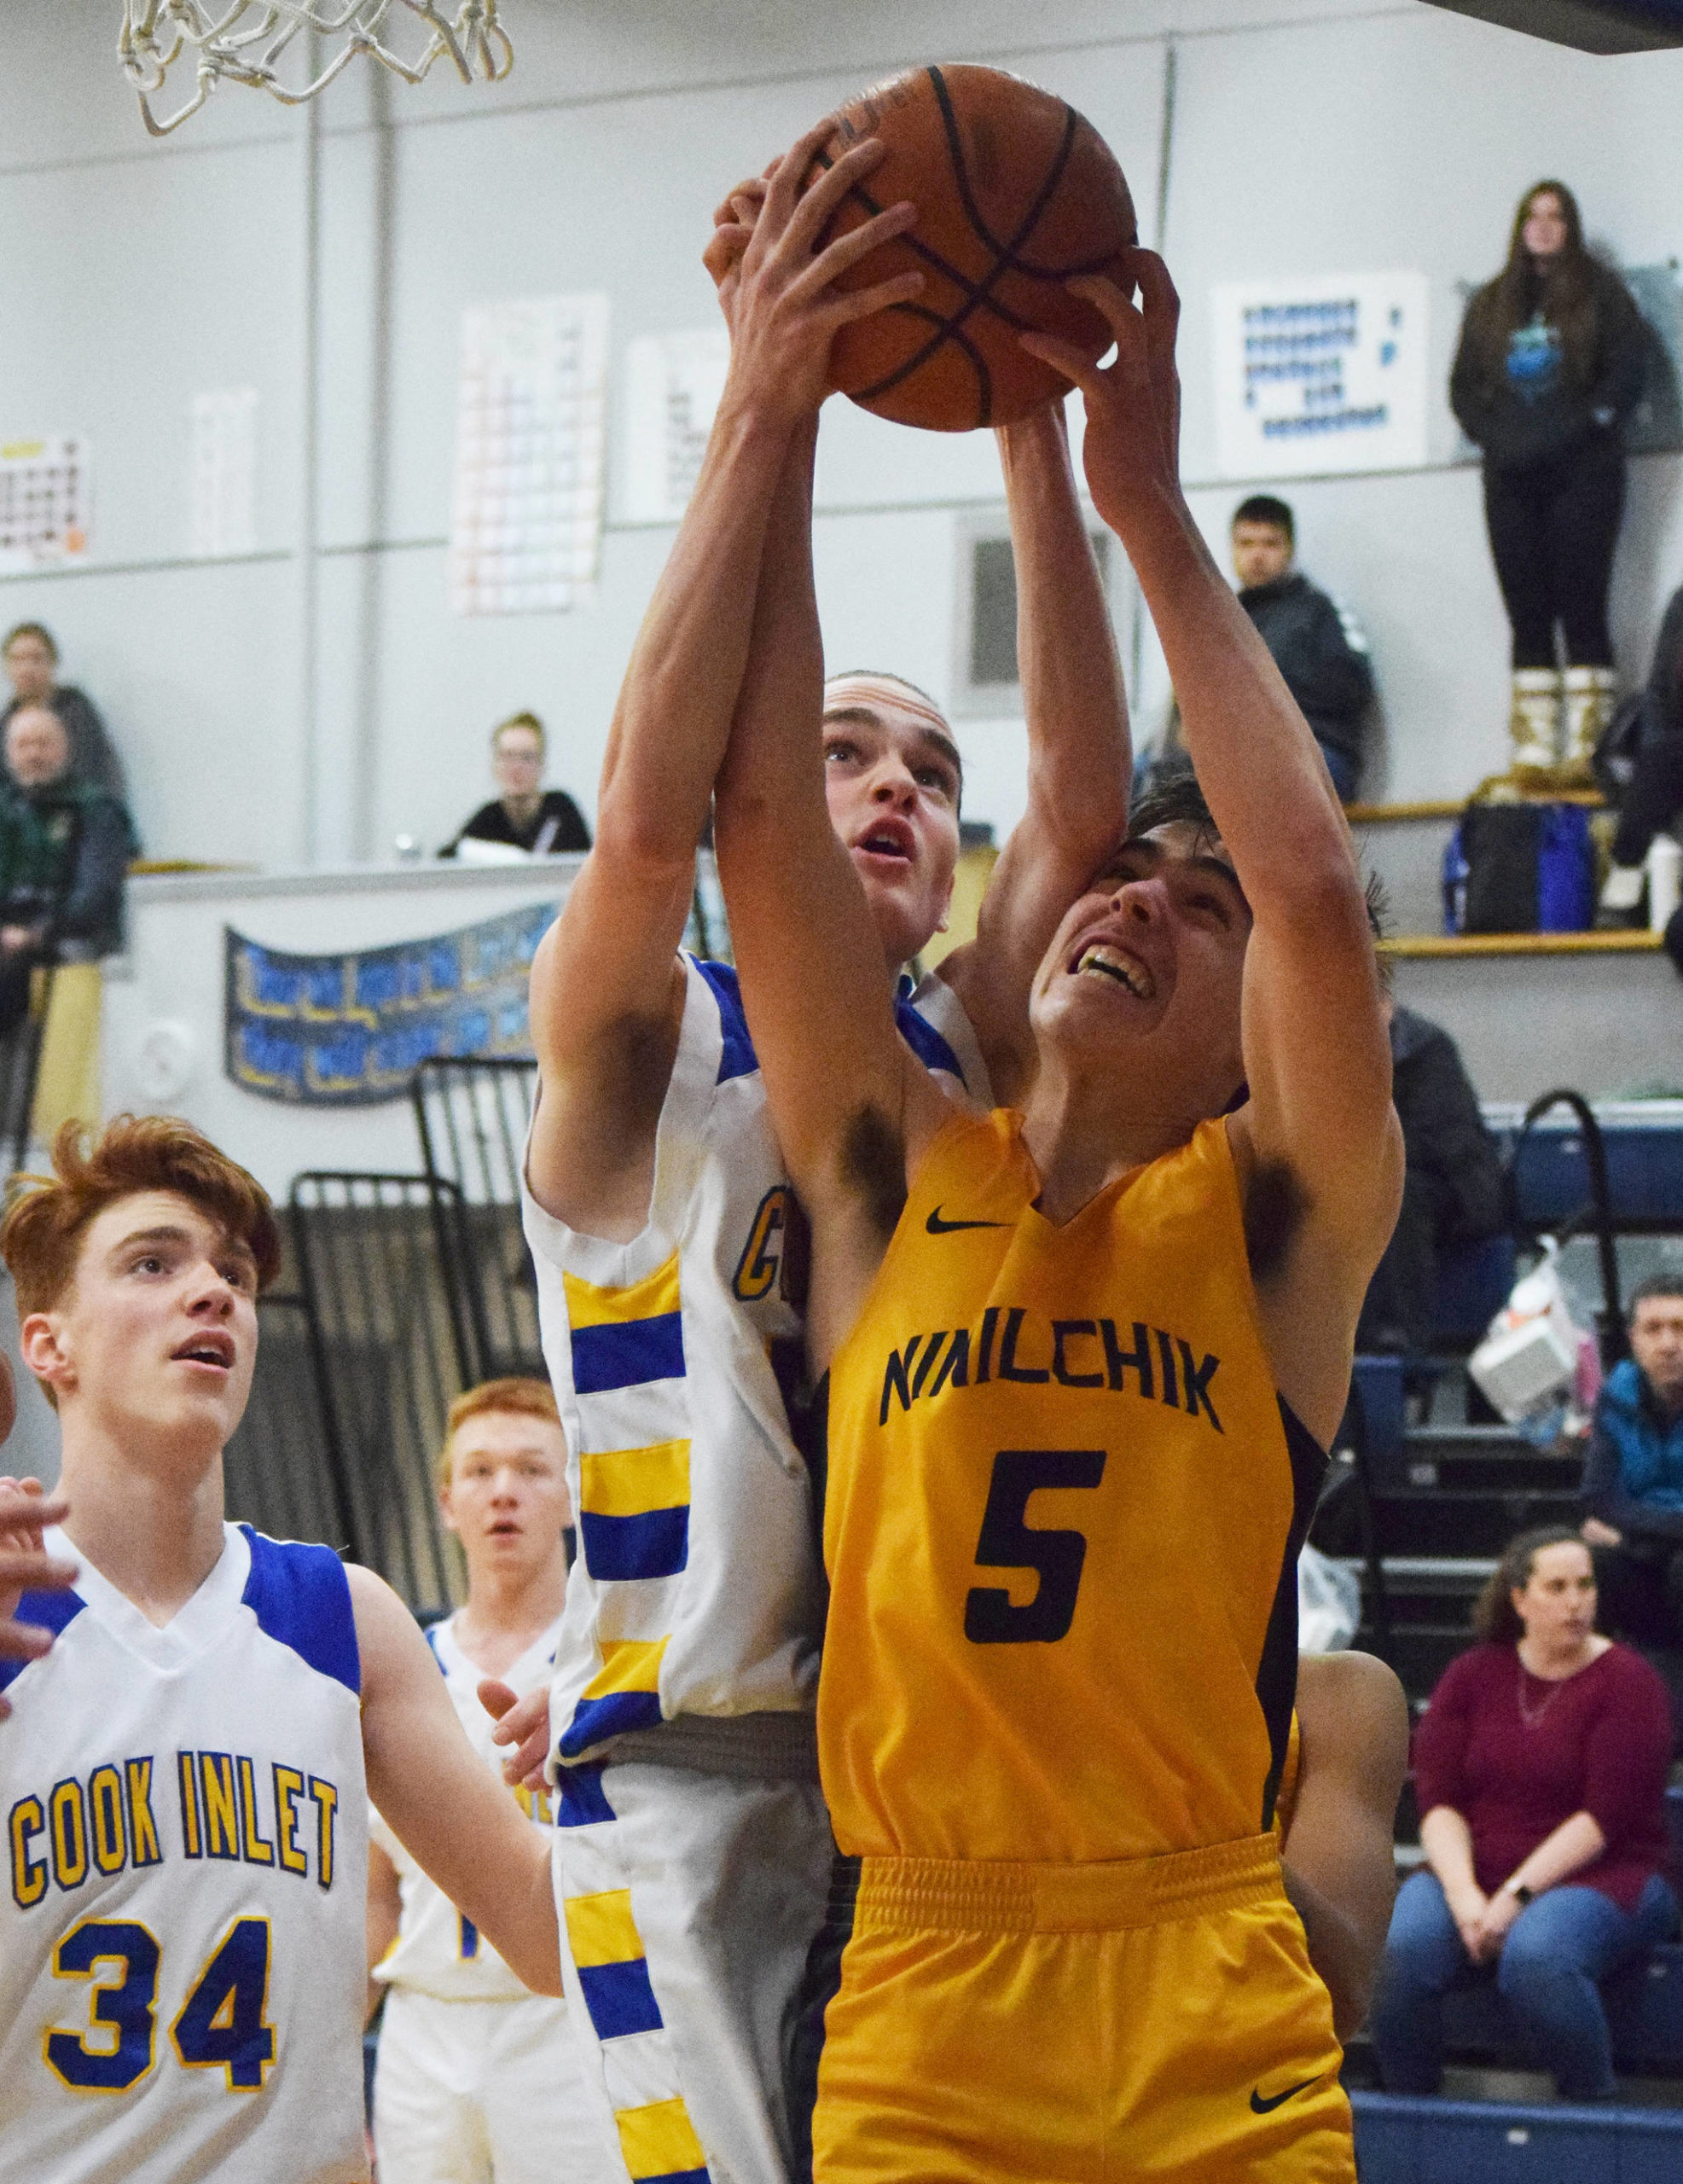 Ninilchik’s Tom Nelson (5) gets a block from CIA’s Josh Boyd, Tuesday, Jan. 7, 2020, at Cook Inlet Academy in Soldotna, Alaska. (Photo by Joey Klecka/Peninsula Clarion)